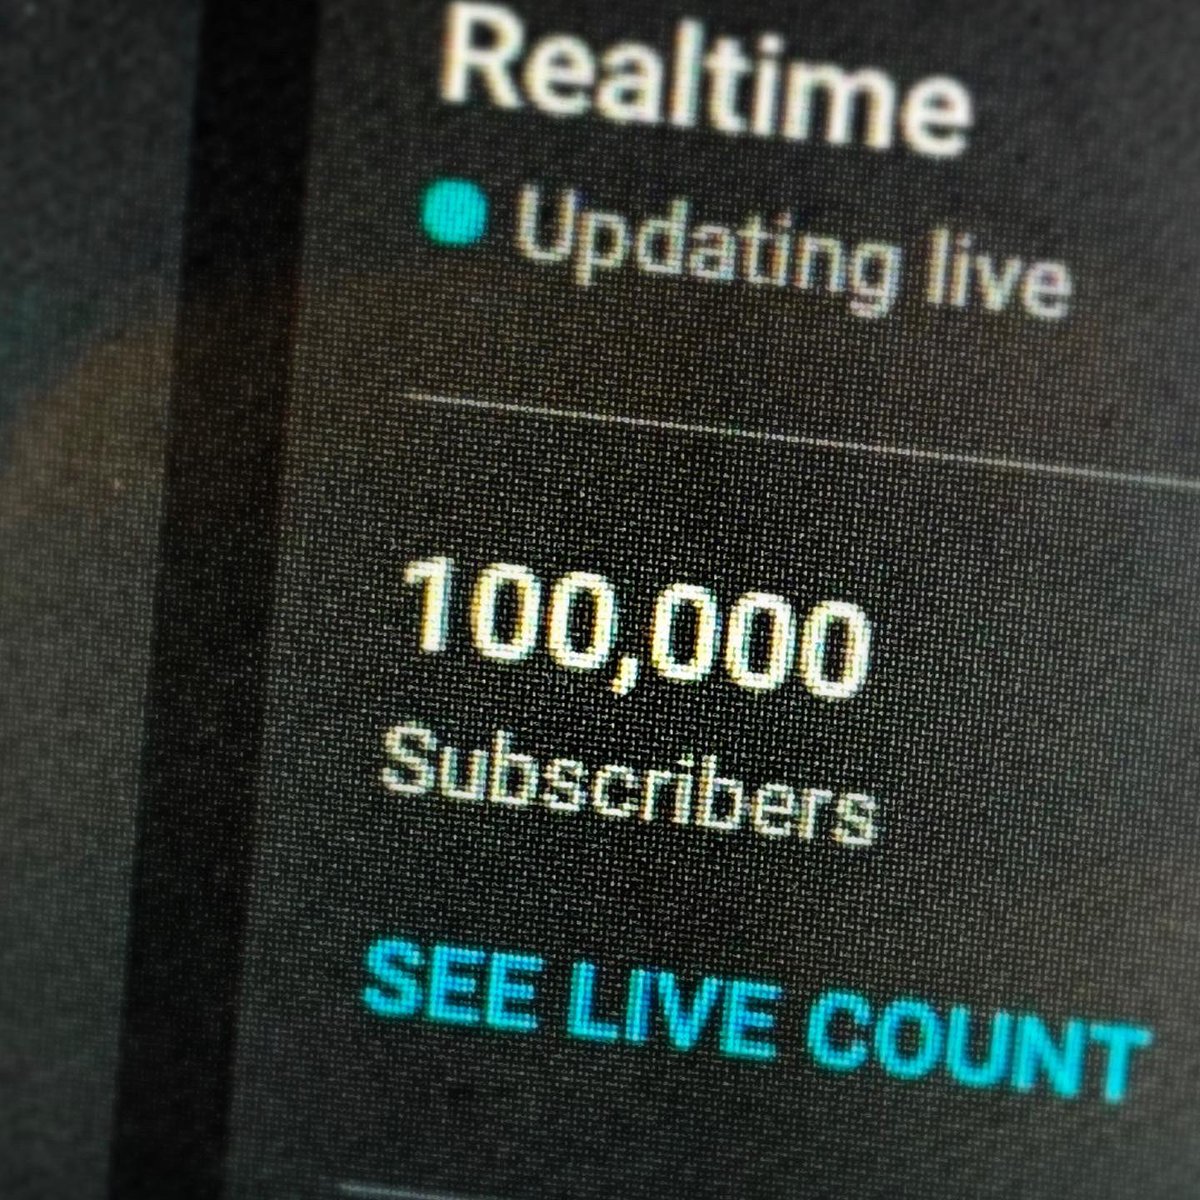 100,000  subscriber Realtime live count as it happened